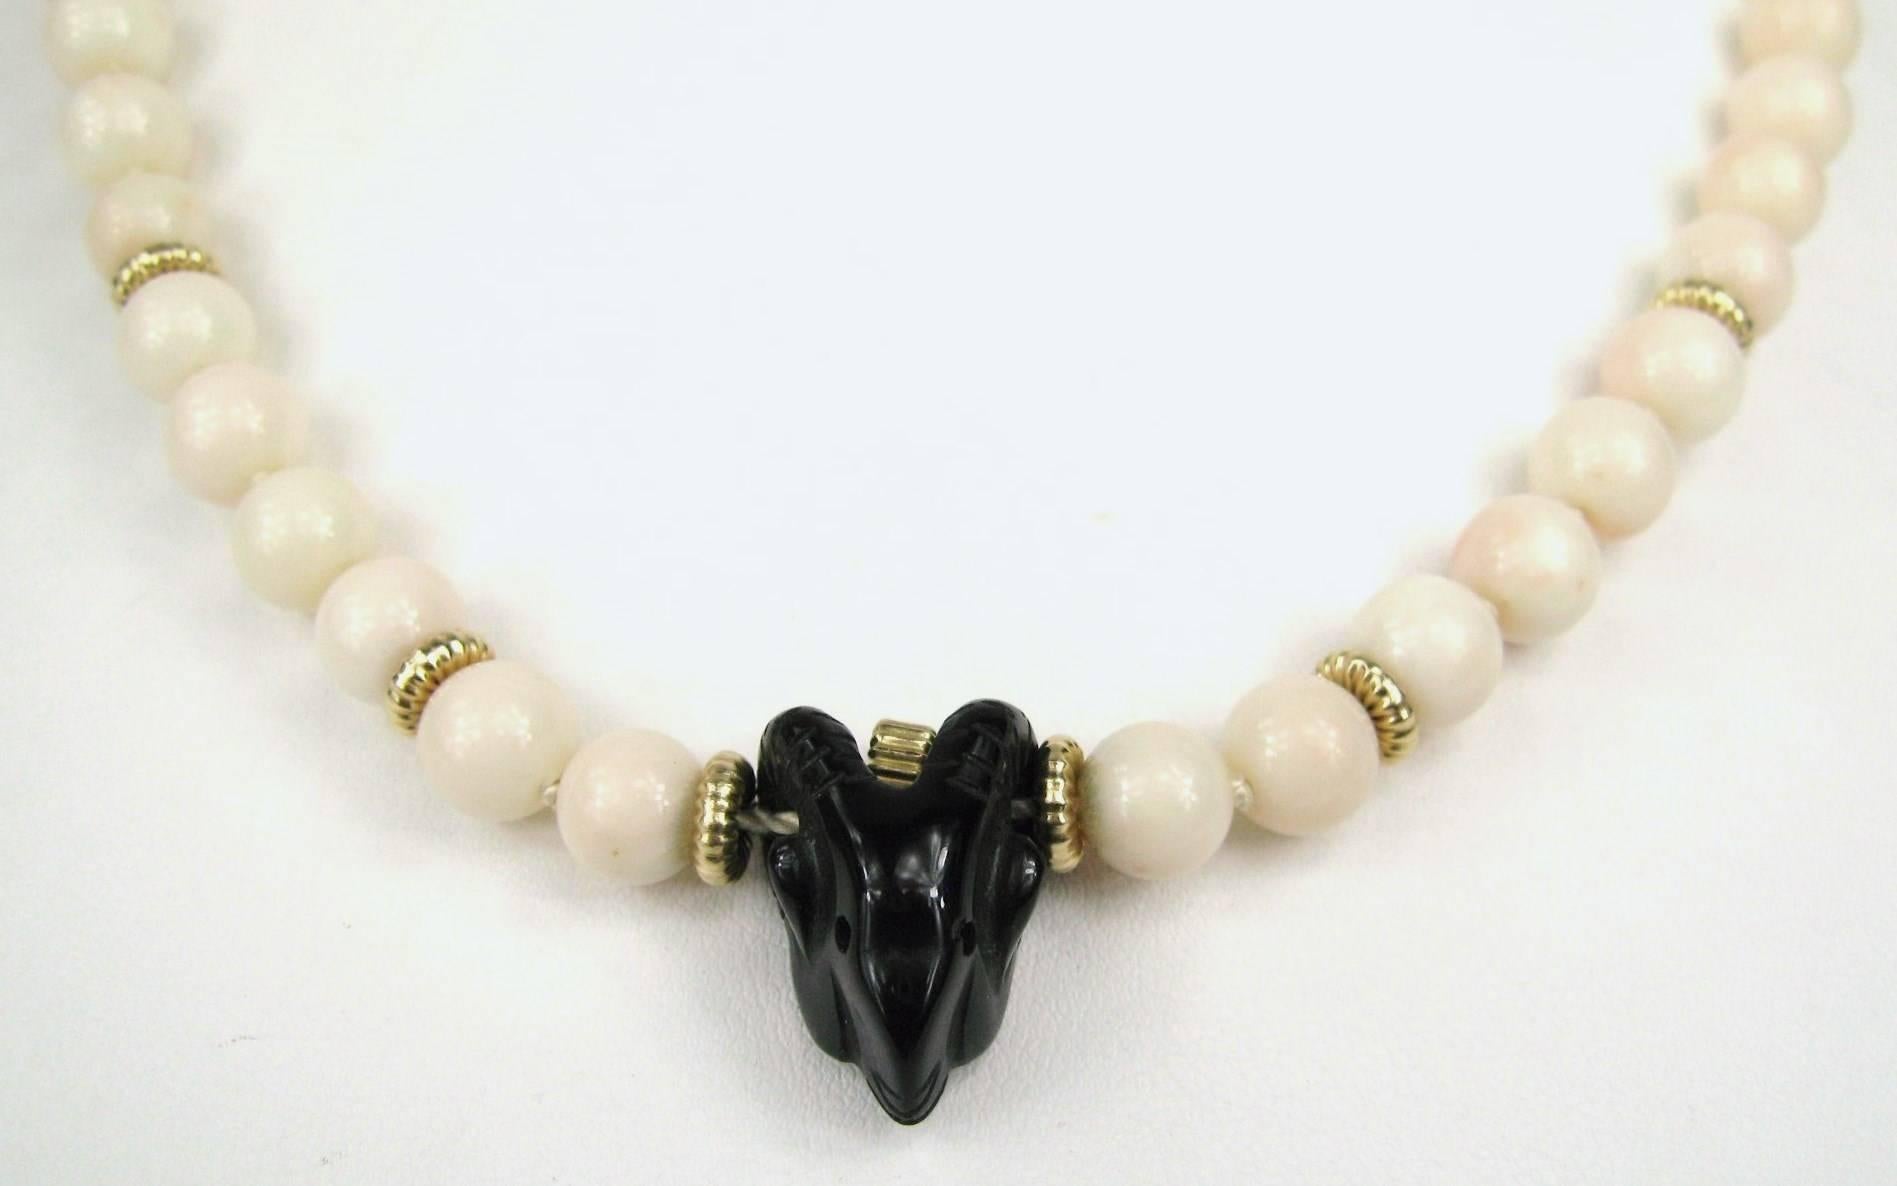 Stunning Coral beaded 14K gold necklace with Onyx Ram head. Ram head center with Gold rondelles bead scattered in between the coral beads, Beads measures .32 in. or 8.15mm and the ram is .82 in.  x .46 in. The Necklace measures 19 inches end to end